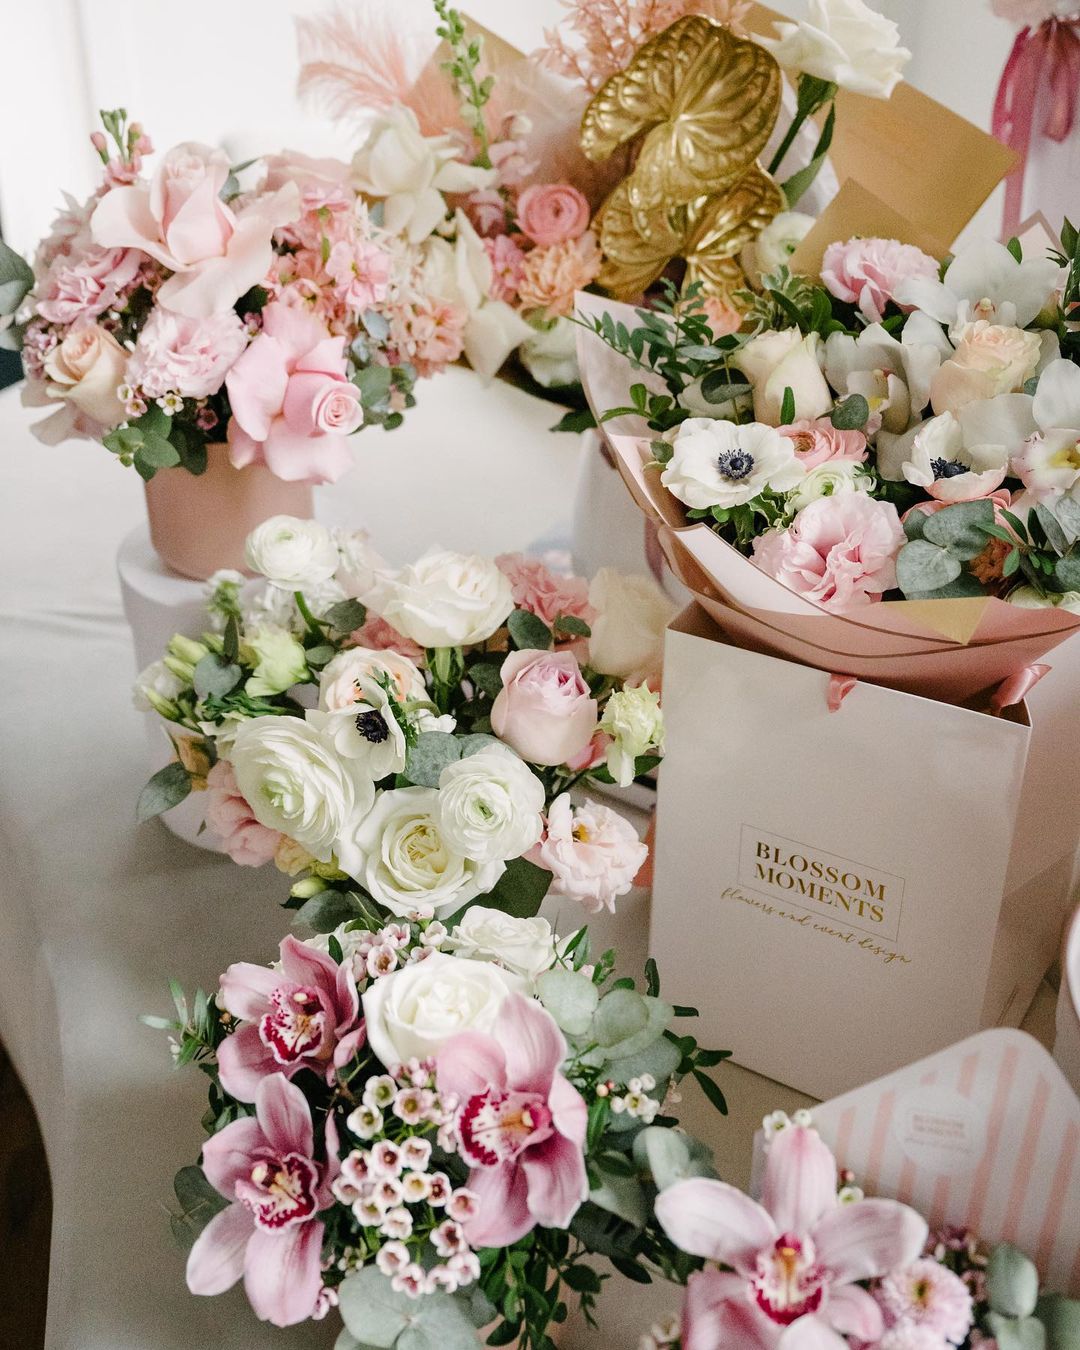 There are five floral arrangements ranging from medium to large is size. There are a variety of florals included. Colouring is pink, green, pink.